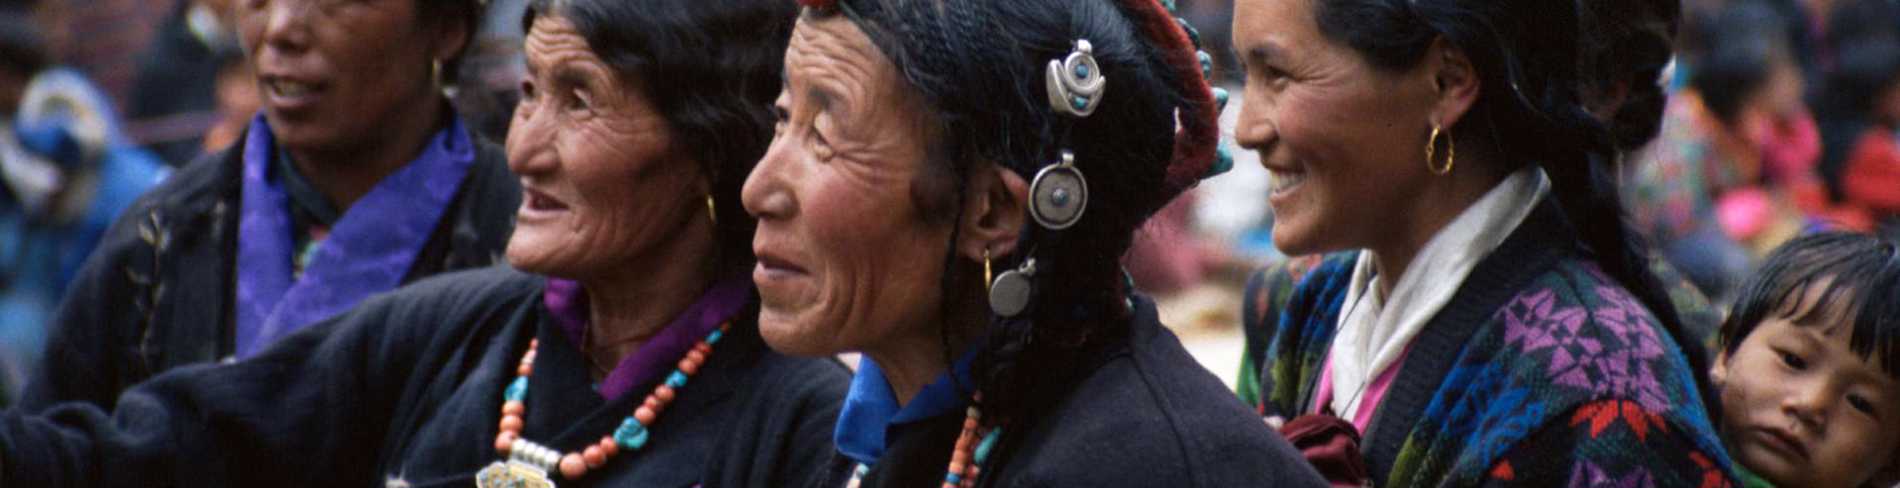 Participant in the Tiji Festival held in the Kingdom of Mustang in luxury travel destination Nepal